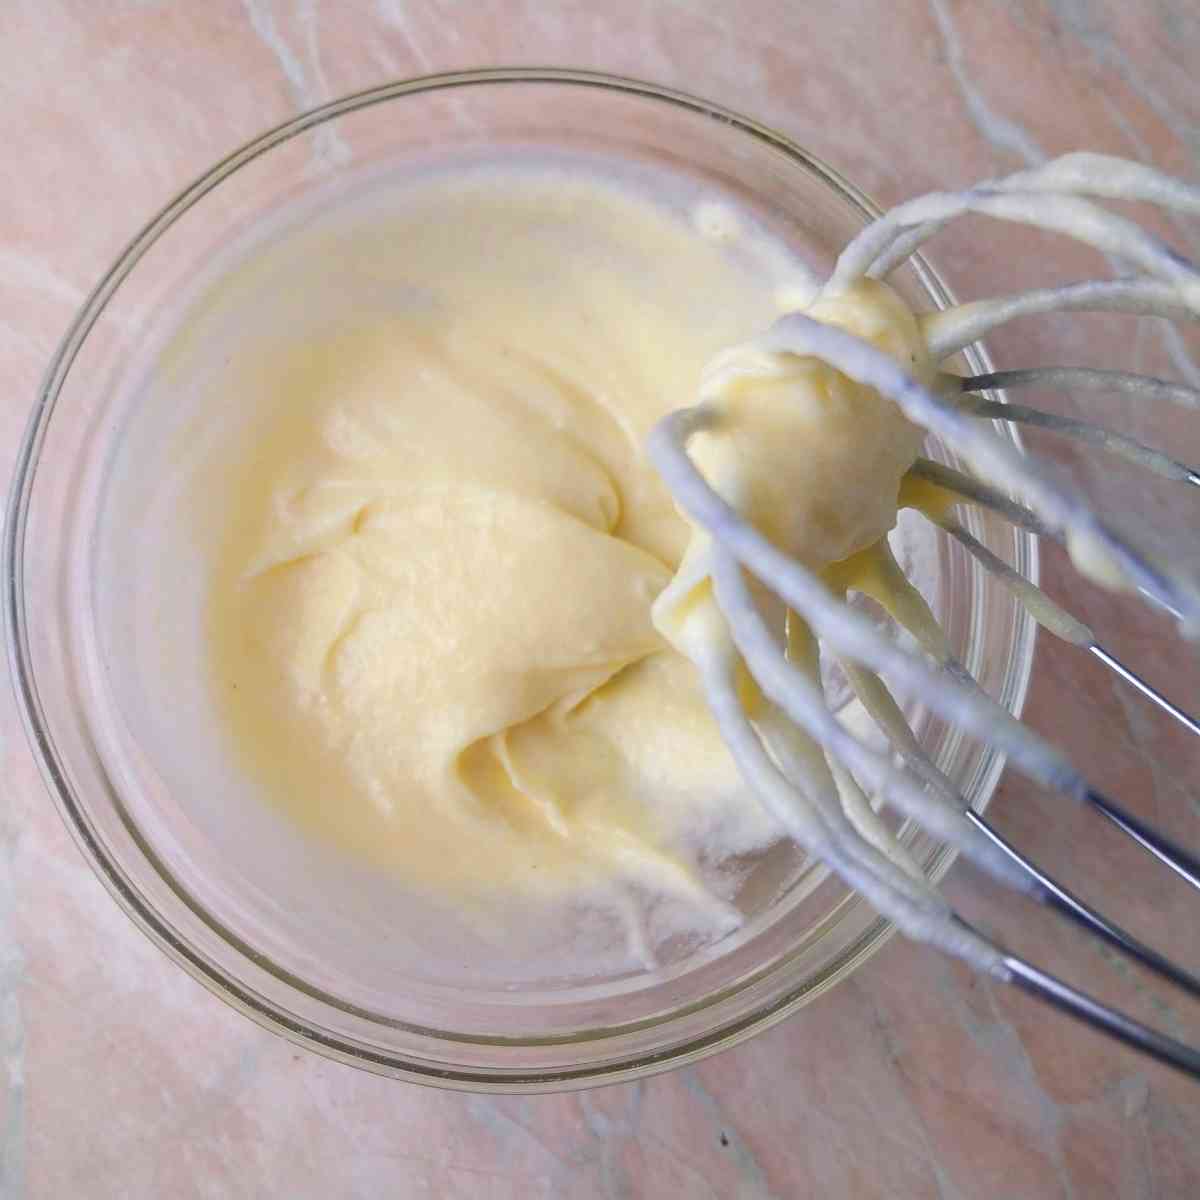 Flour mixture in a glass bowl with a whisk.